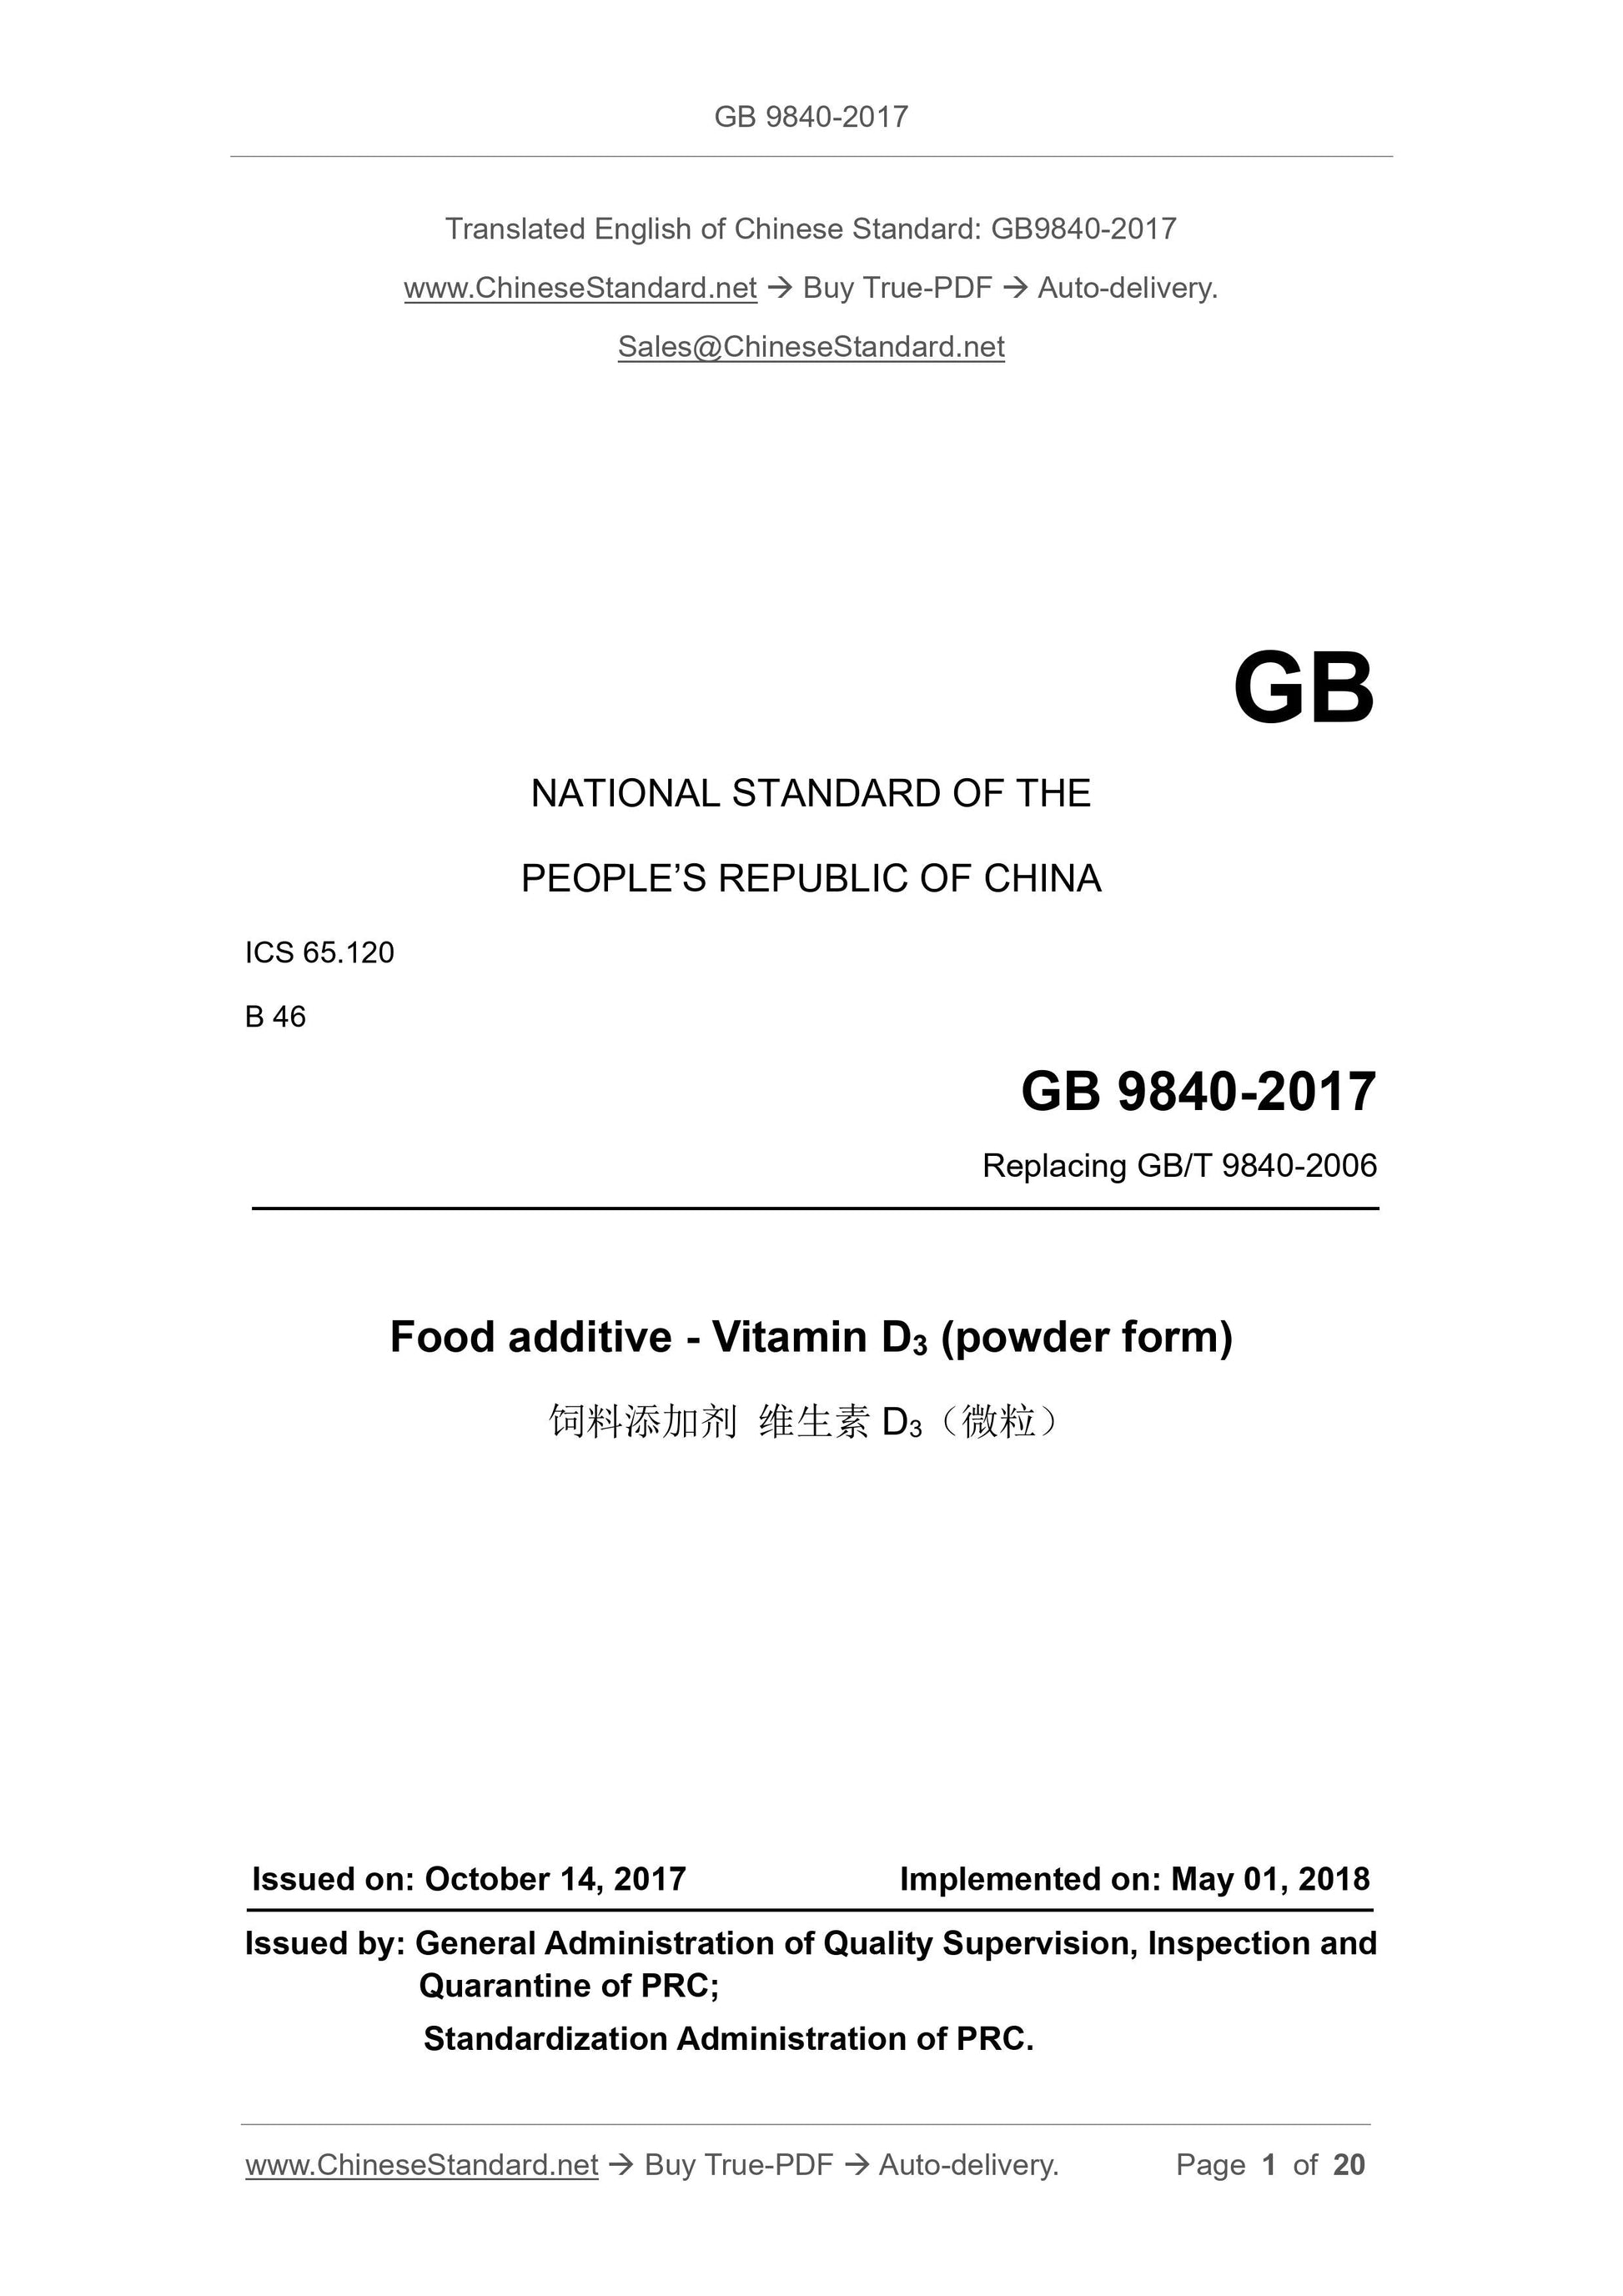 GB 9840-2017 Page 1